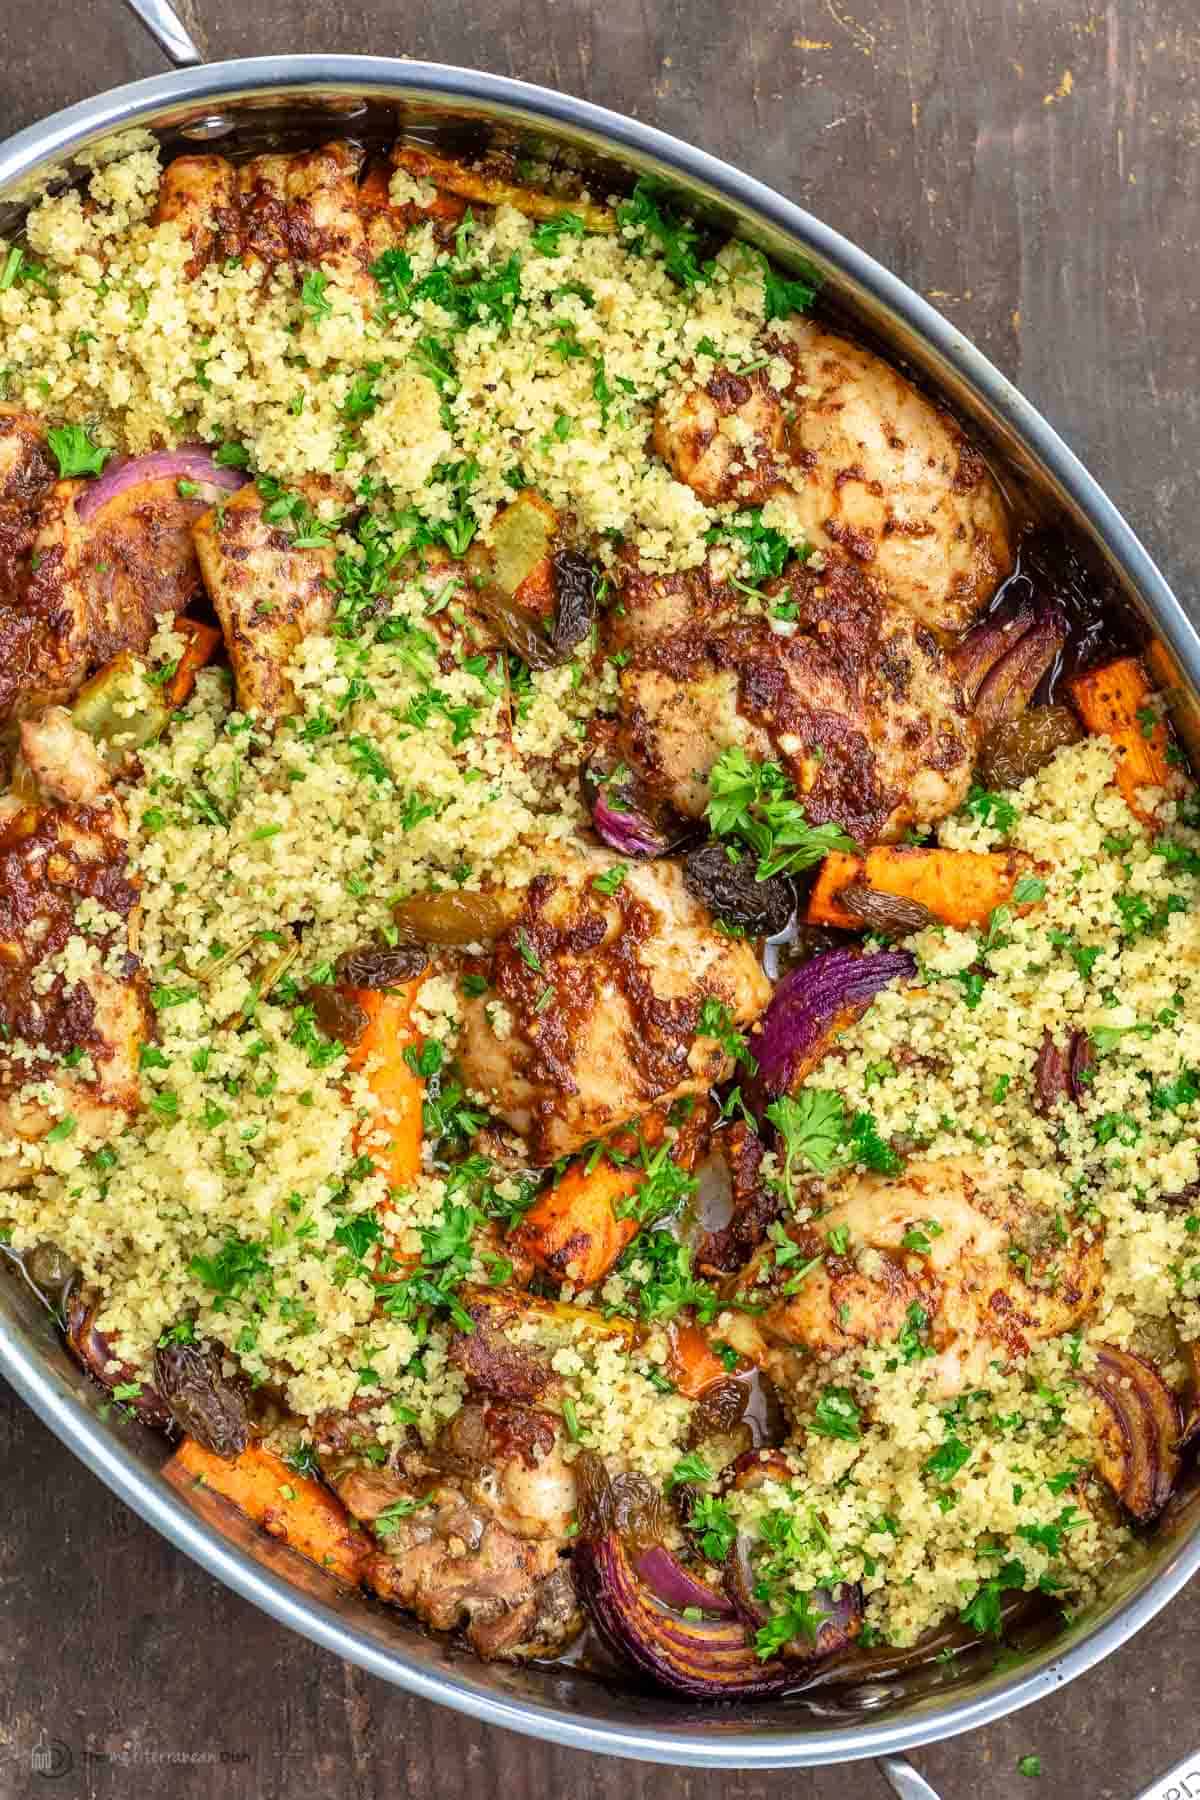 Overhead view of chicken and couscous